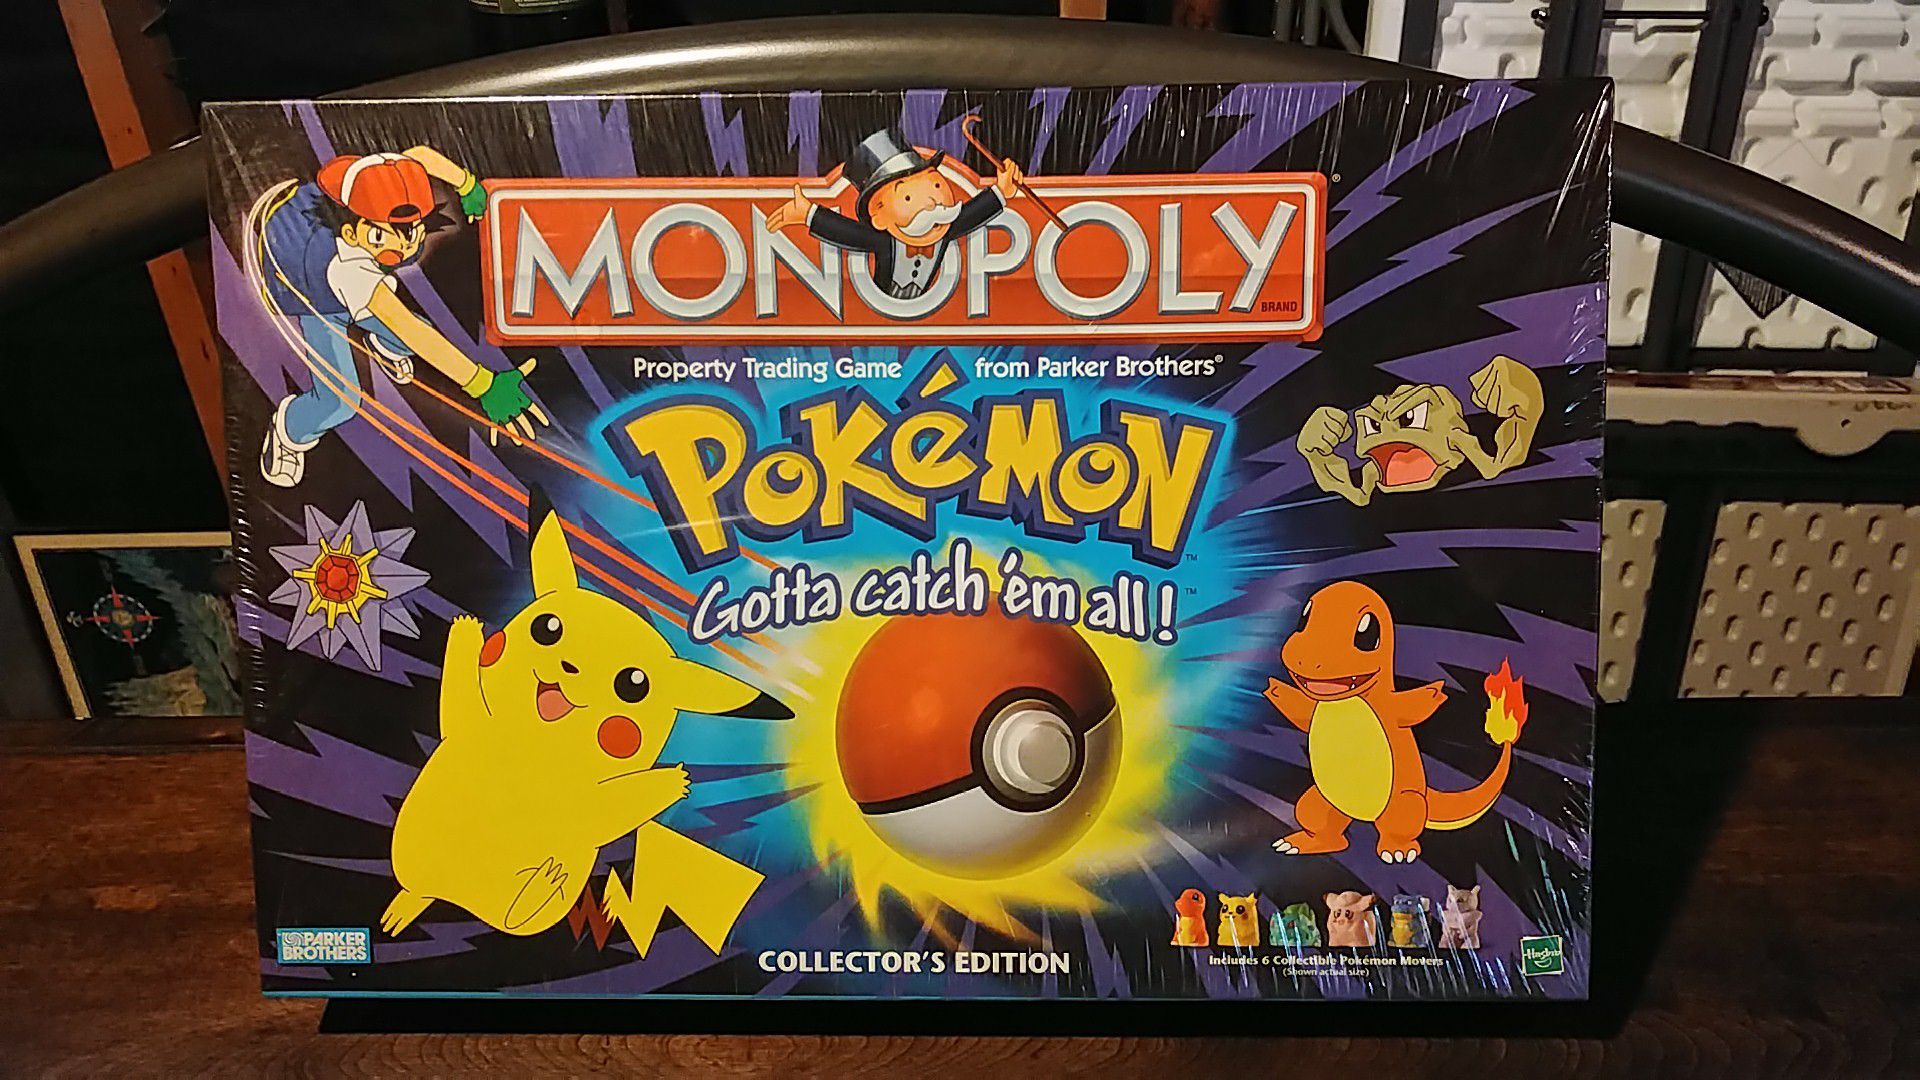 Classic Pokemon Monopoly from 1999 - New In Box